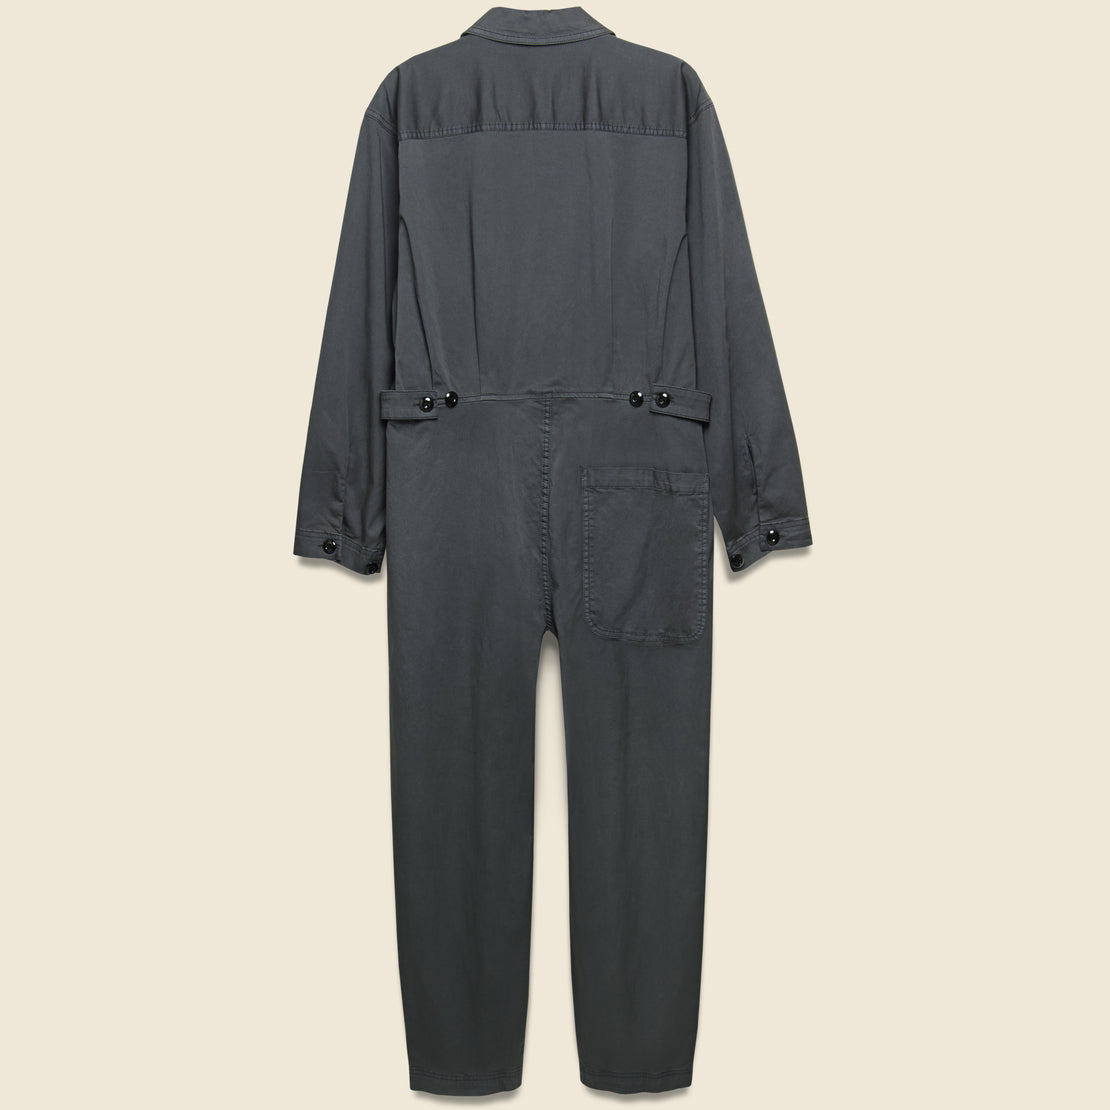 Standard Cotton Jumpsuit - Washed Black - Alex Mill - STAG Provisions - W - Onepiece - Jumpsuit